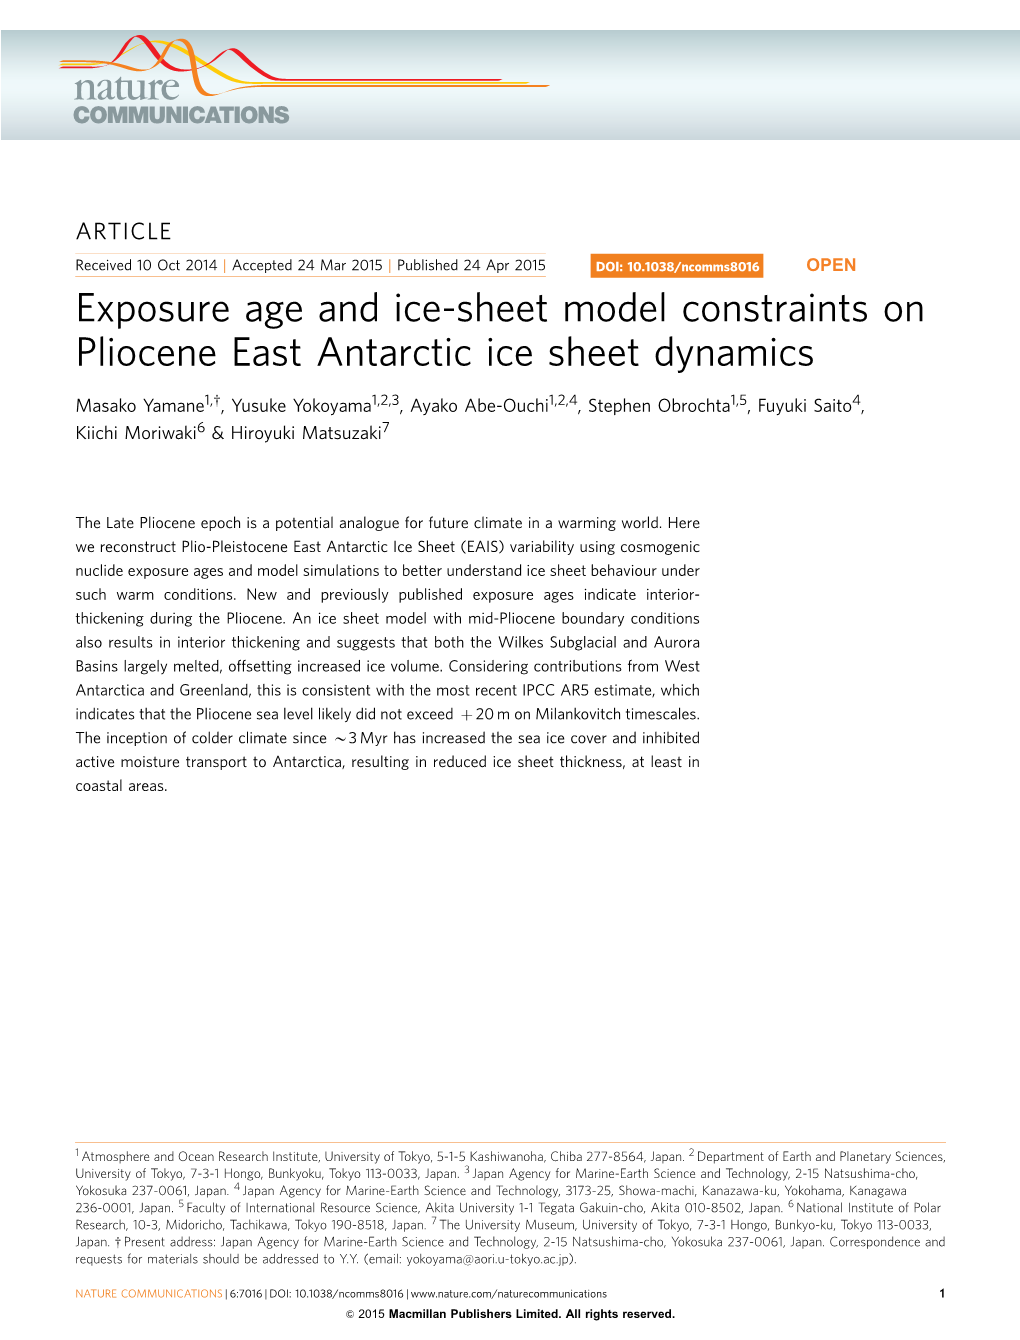 Exposure Age and Ice-Sheet Model Constraints on Pliocene East Antarctic Ice Sheet Dynamics